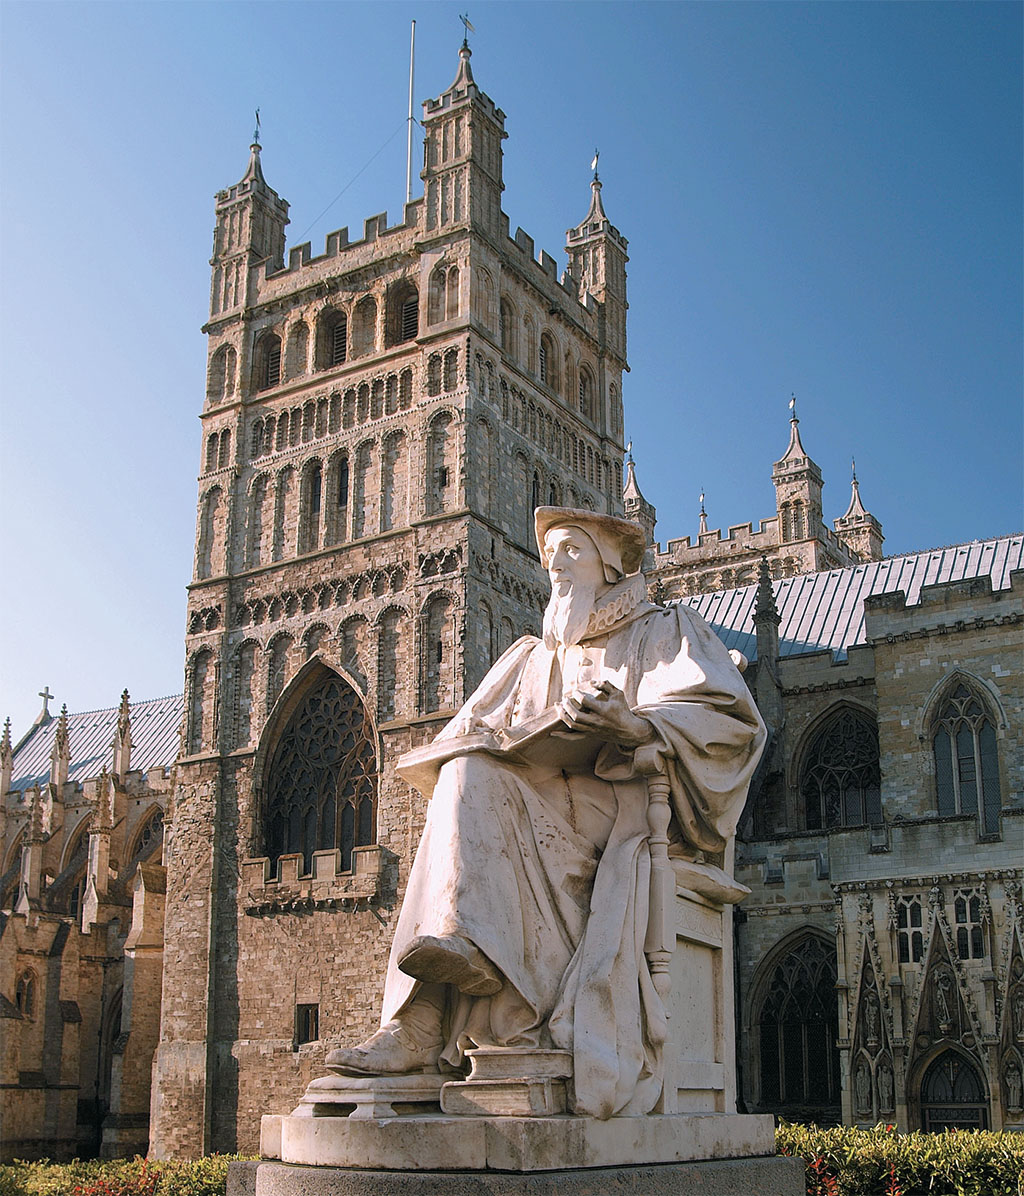 The statue of Richard Hooker stands guard over the close of lovely Exeter Cathedral, founded in 1050